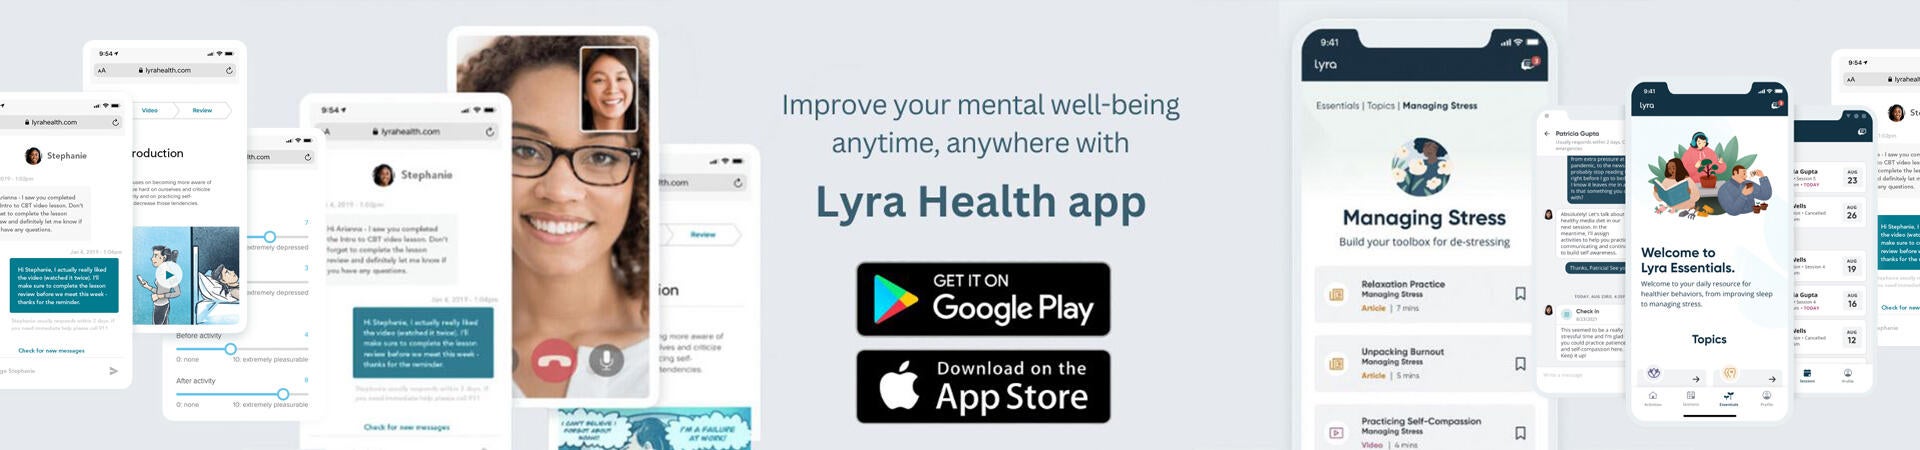 Improve Your Mental Well-being with the Lyra Health app